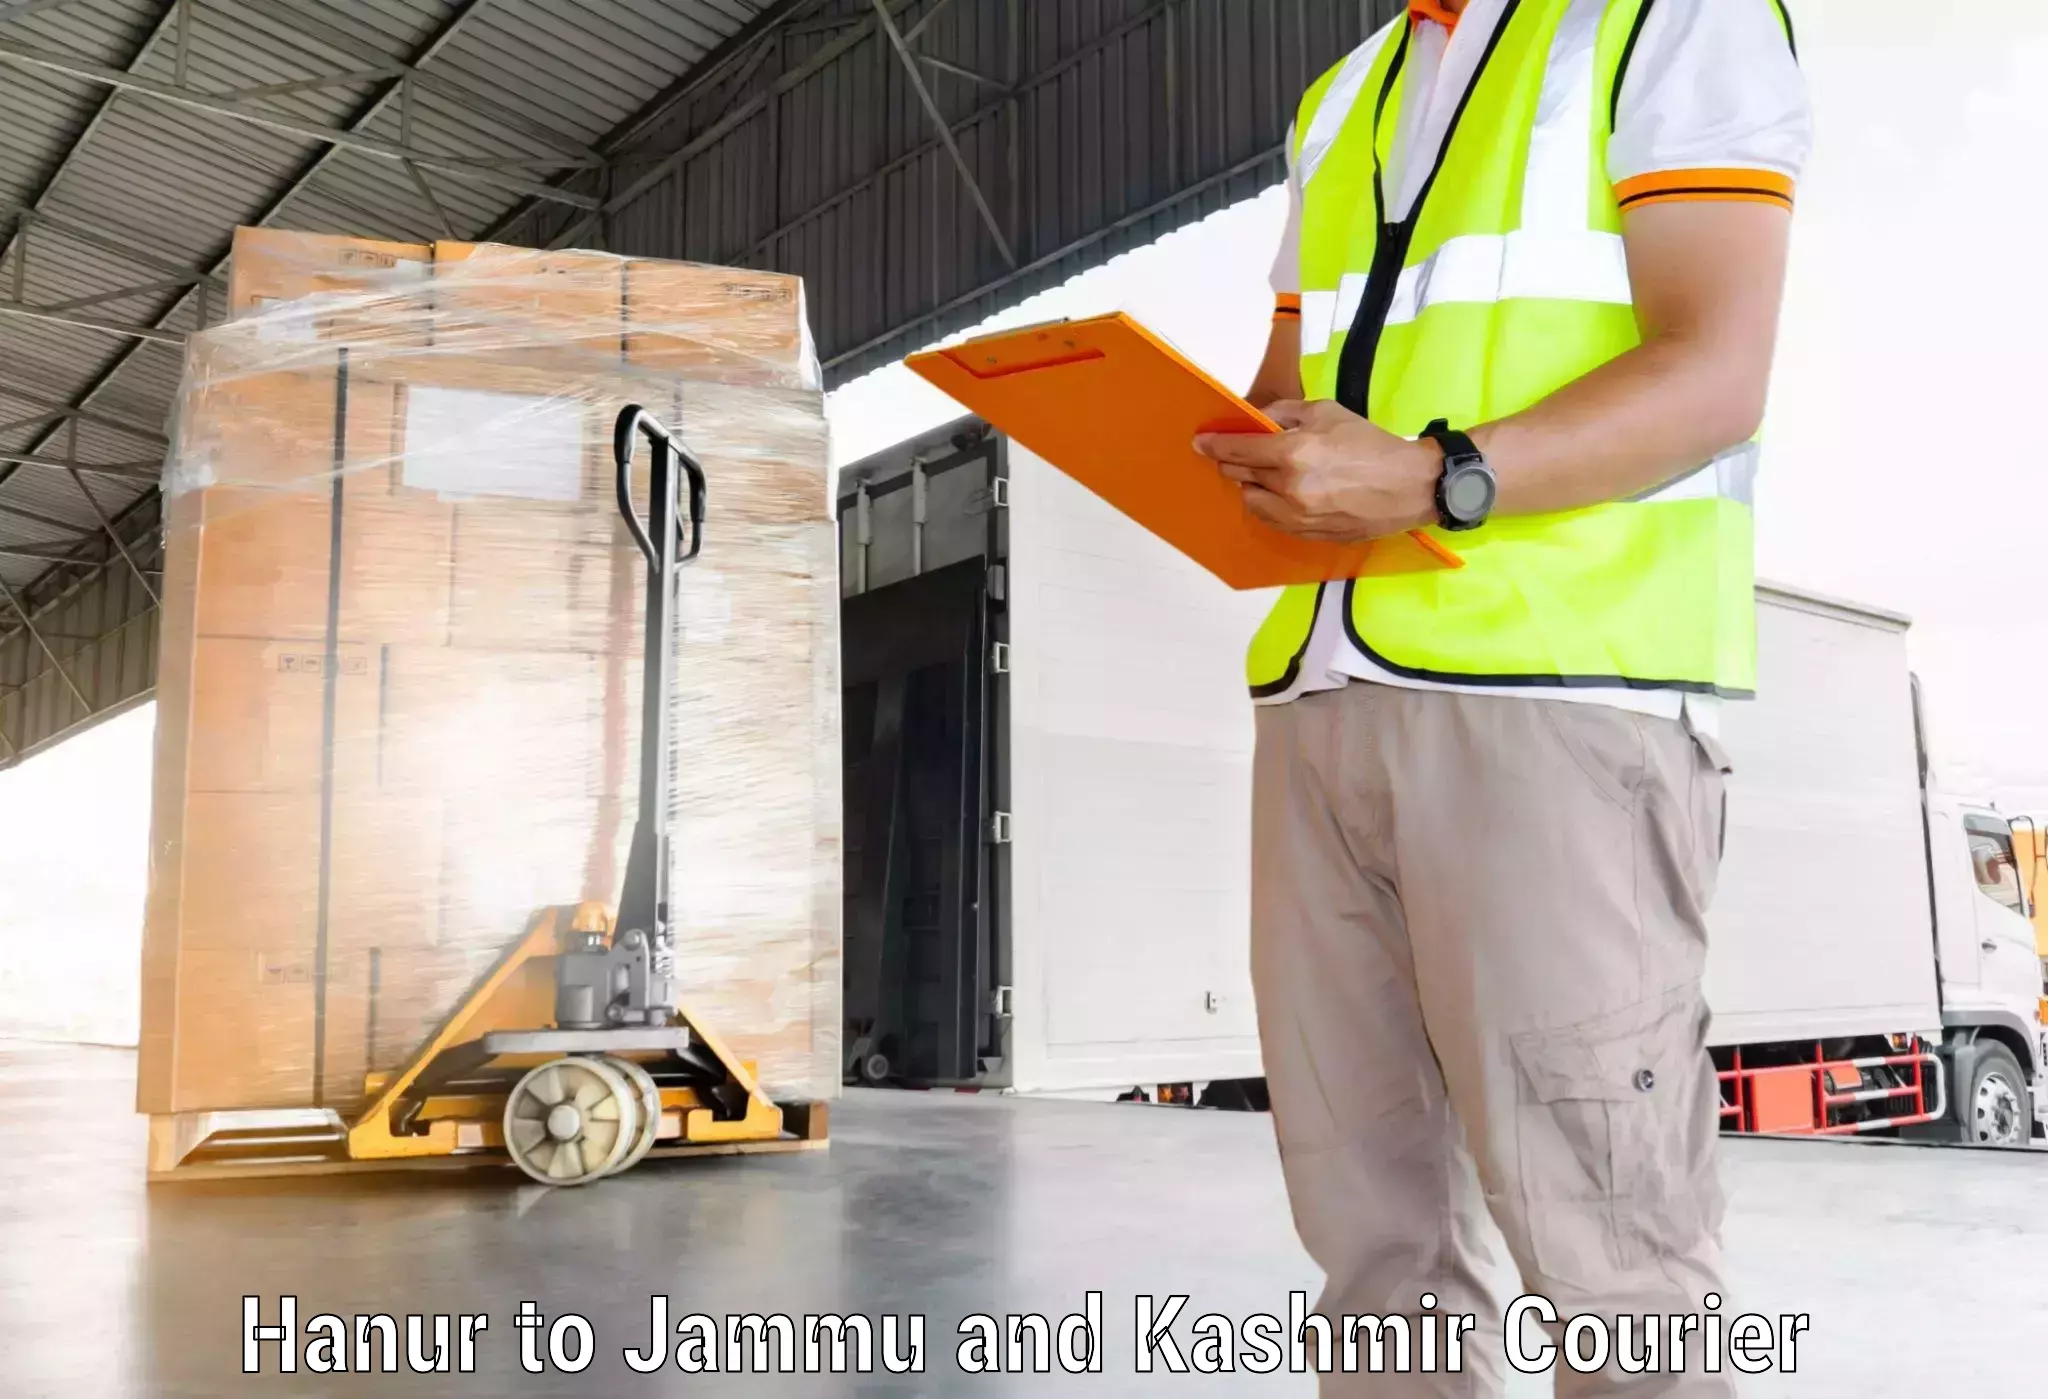 Reliable courier service Hanur to Pulwama